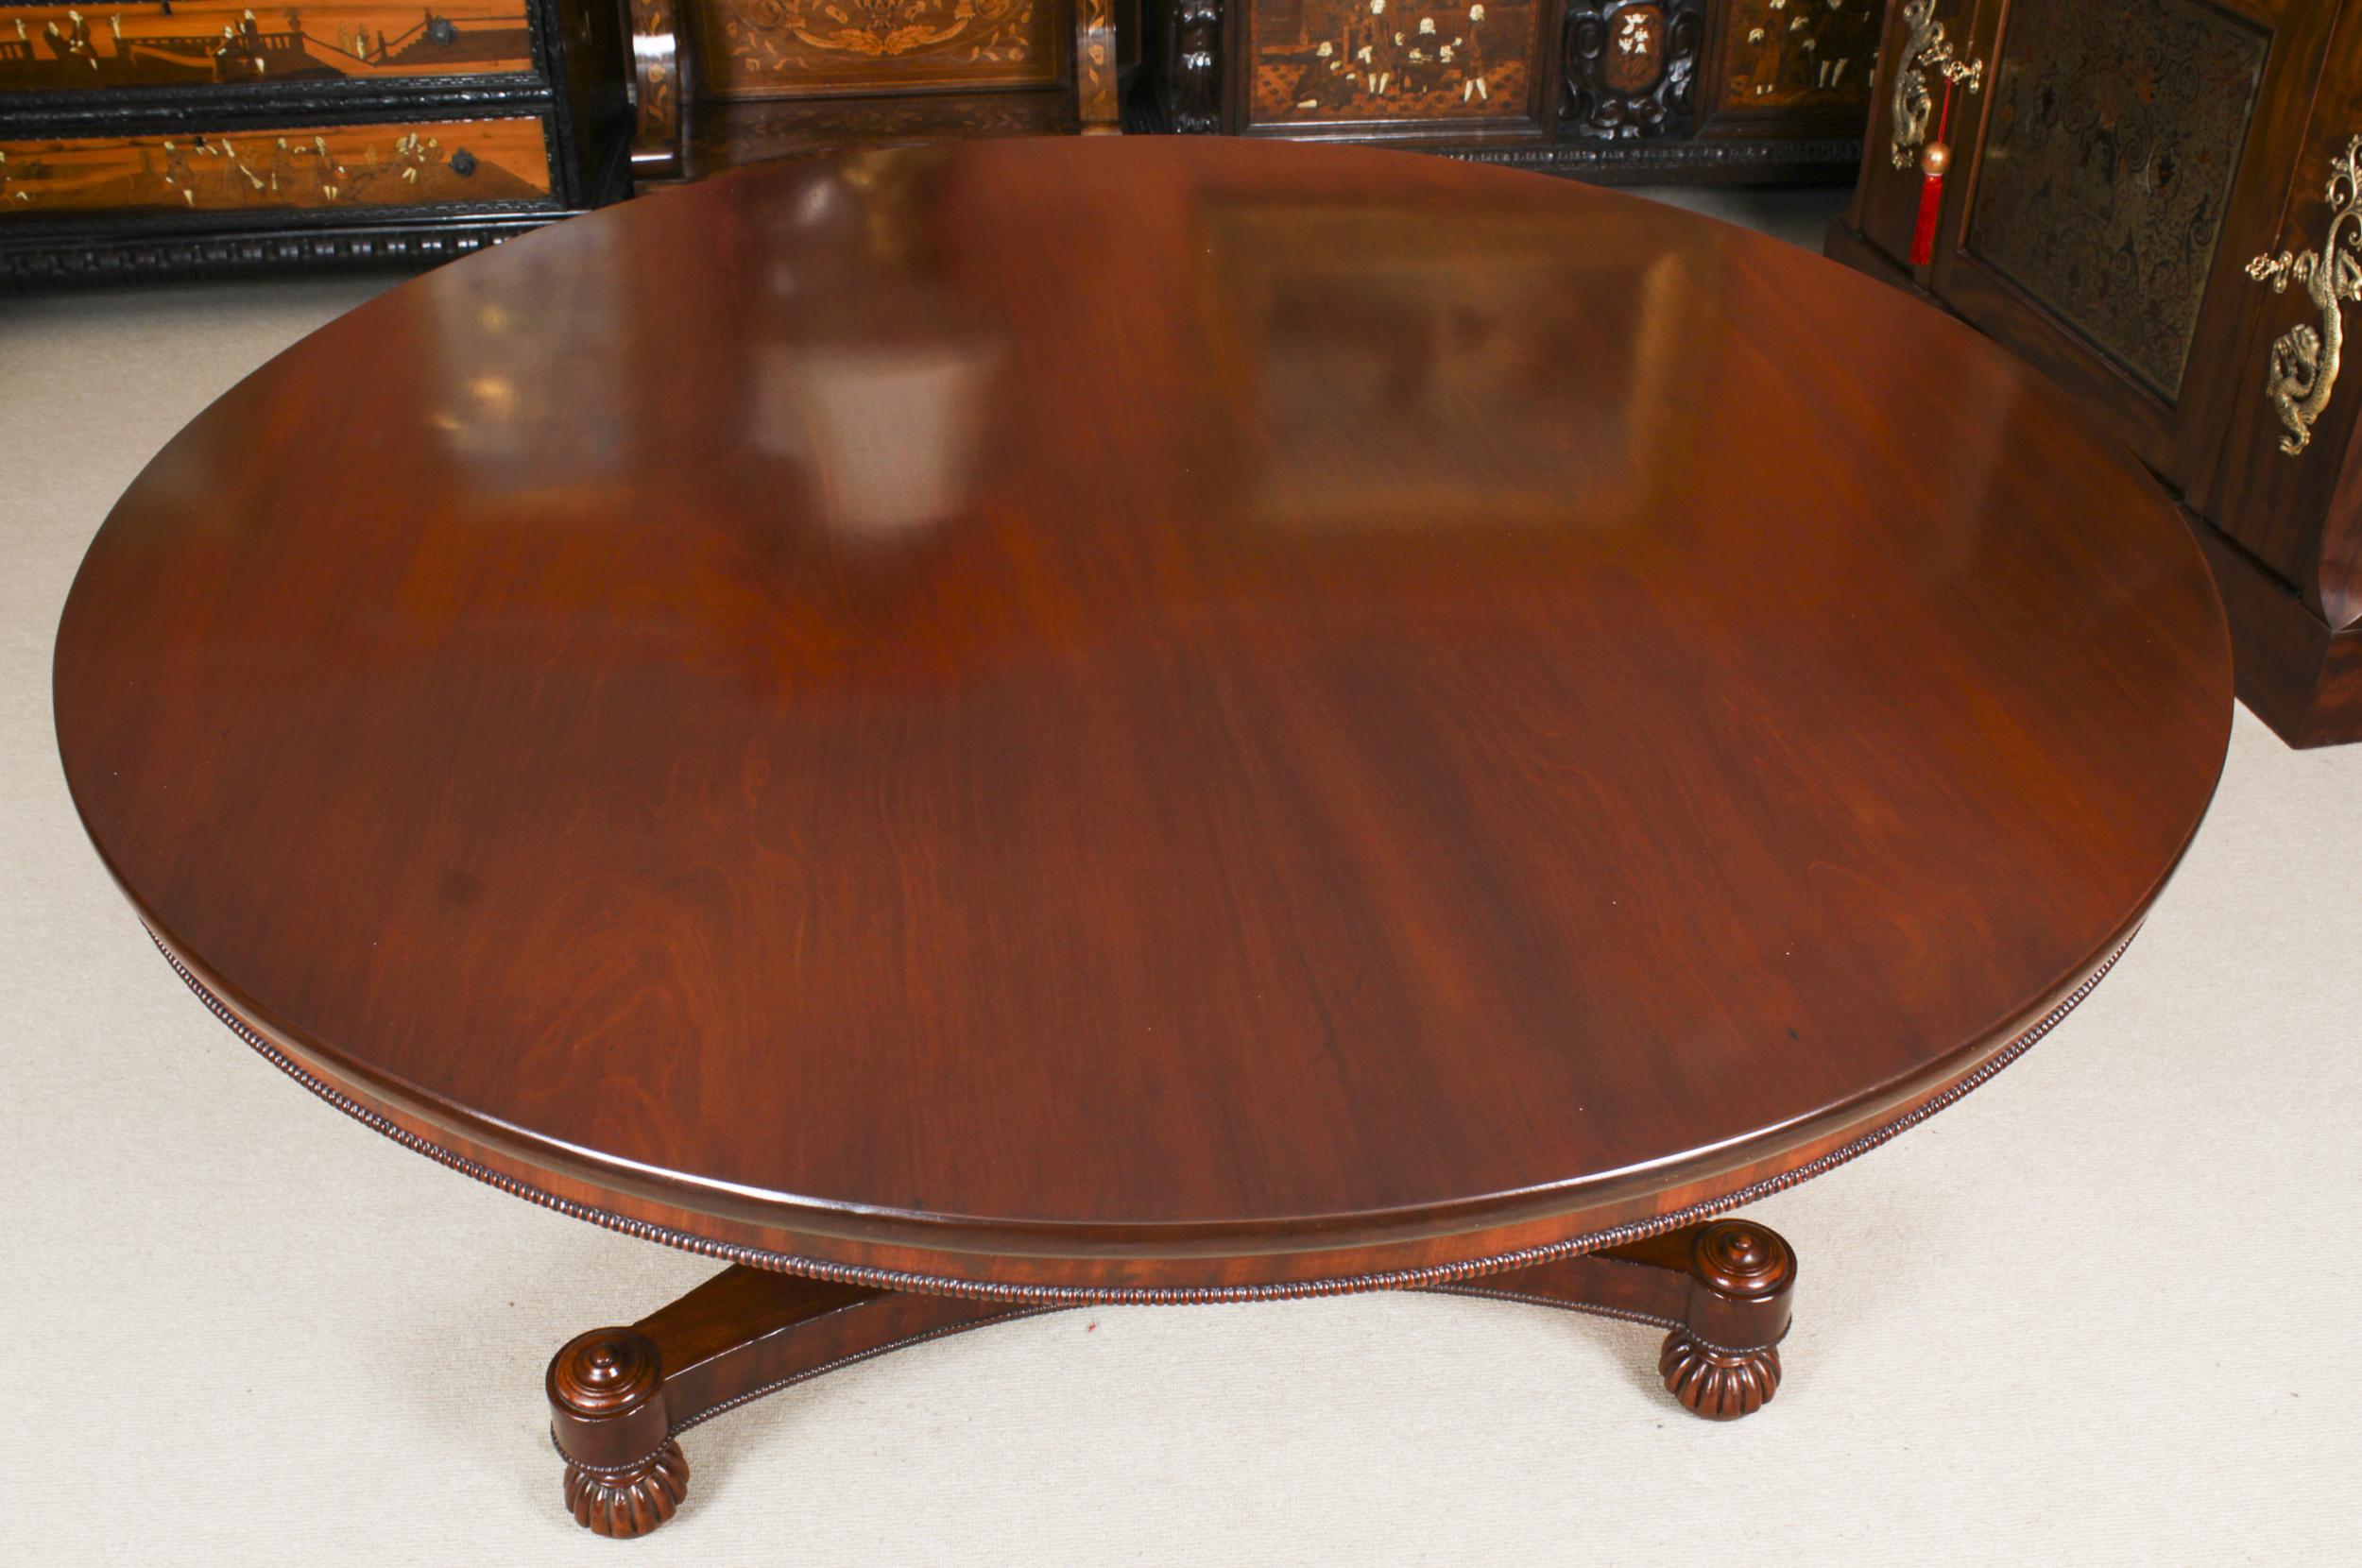 Mid-19th Century Antique William IV Circular Dining Centre Table Early 19th Century